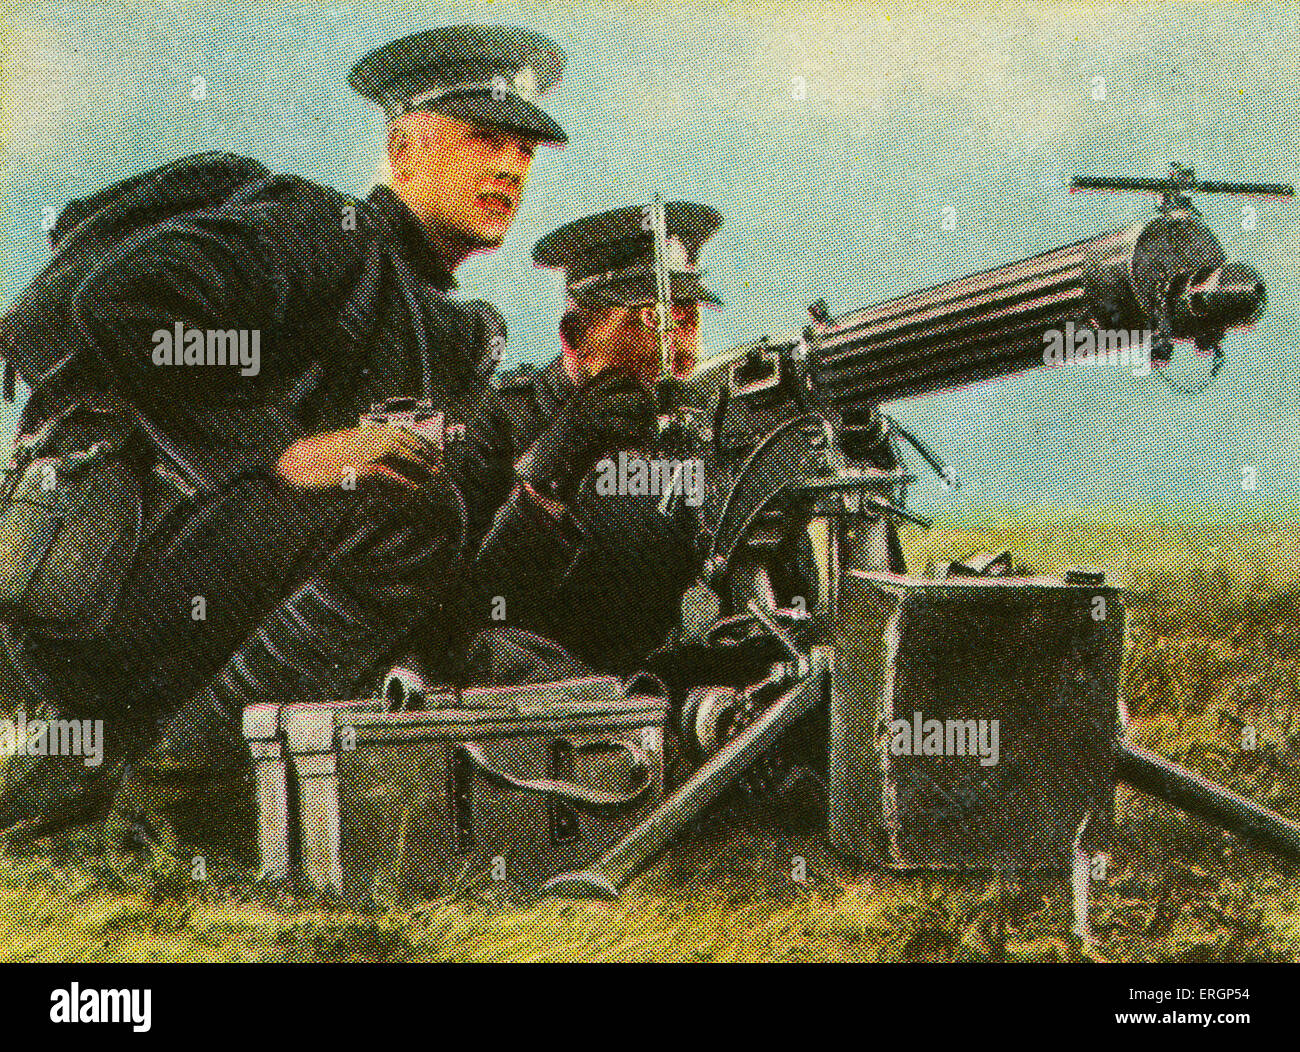 English heavy machine gun with British soldiers. Capacity was 900-1000 shots per minute. Needed to be operated by more than one soldier. (Source: Cigarette cards published in Germany c.1934 reviewing military equipment in arms race prior to WW2) Stock Photo